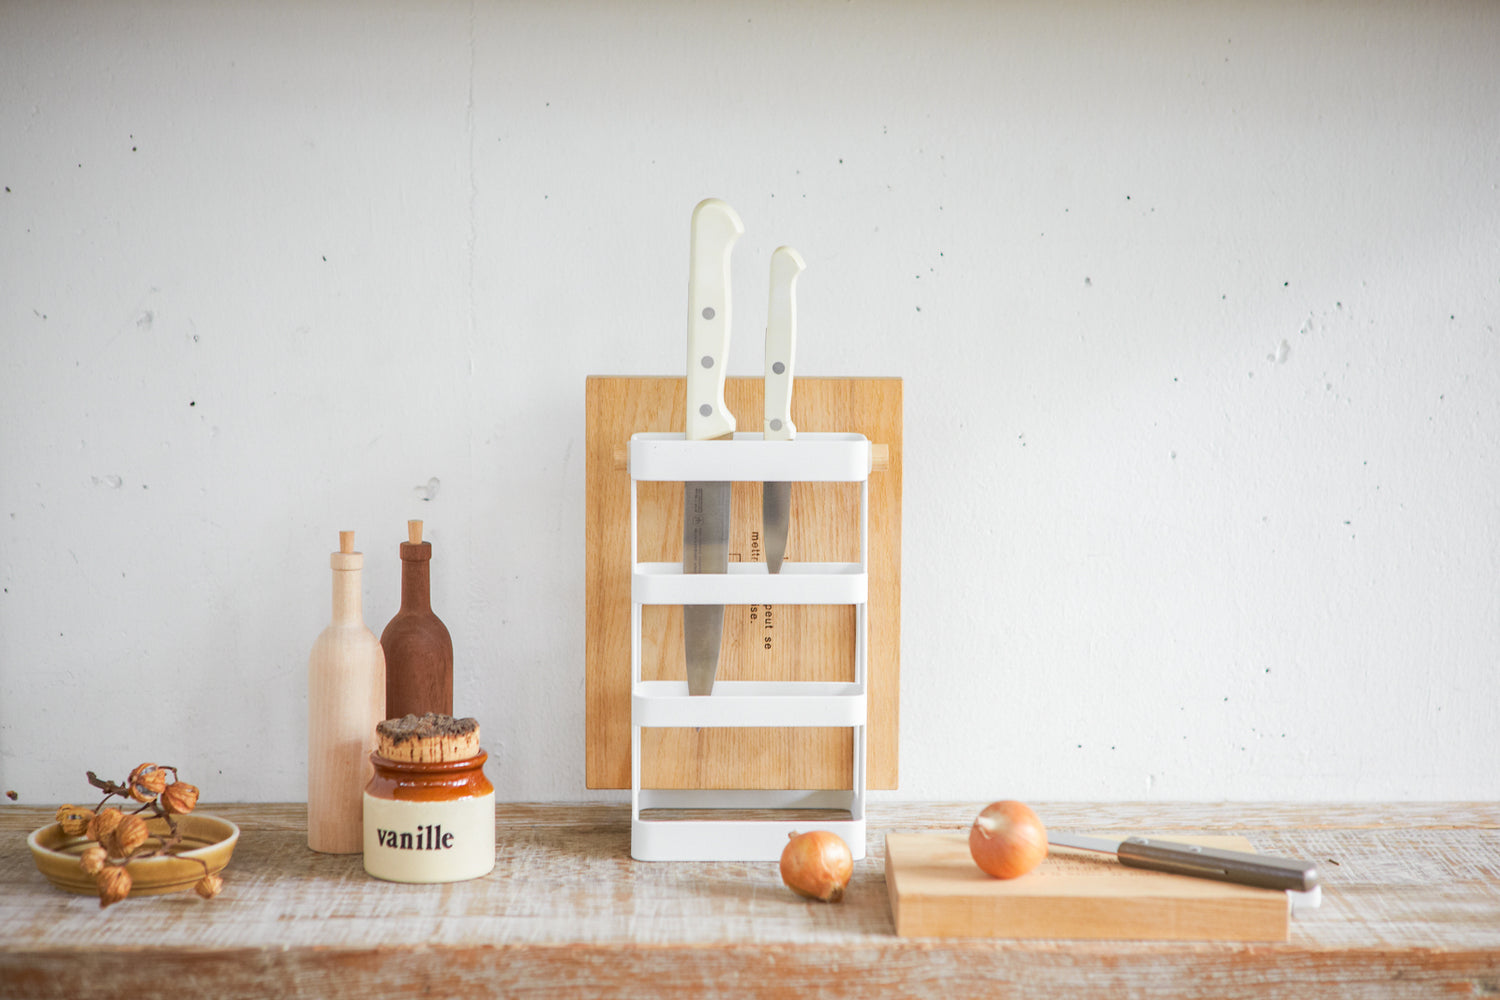 View 4 - Front view of white Knife & Cutting Board holding knives and cutting board on shelf by Yamazaki Home.